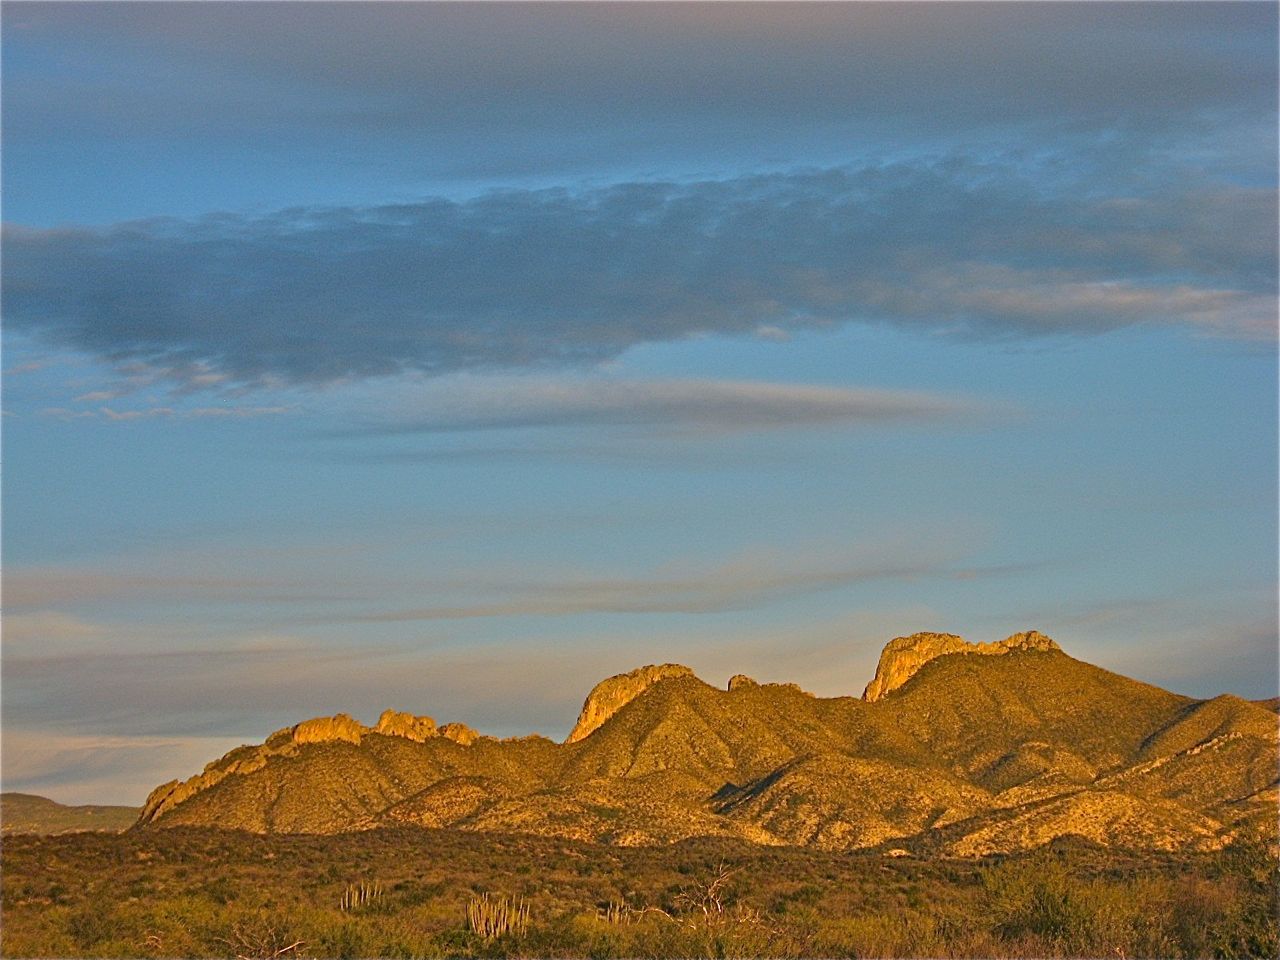 Sunset on the Devils's Spine, a rugged landmark in the Sonoran Sierras.